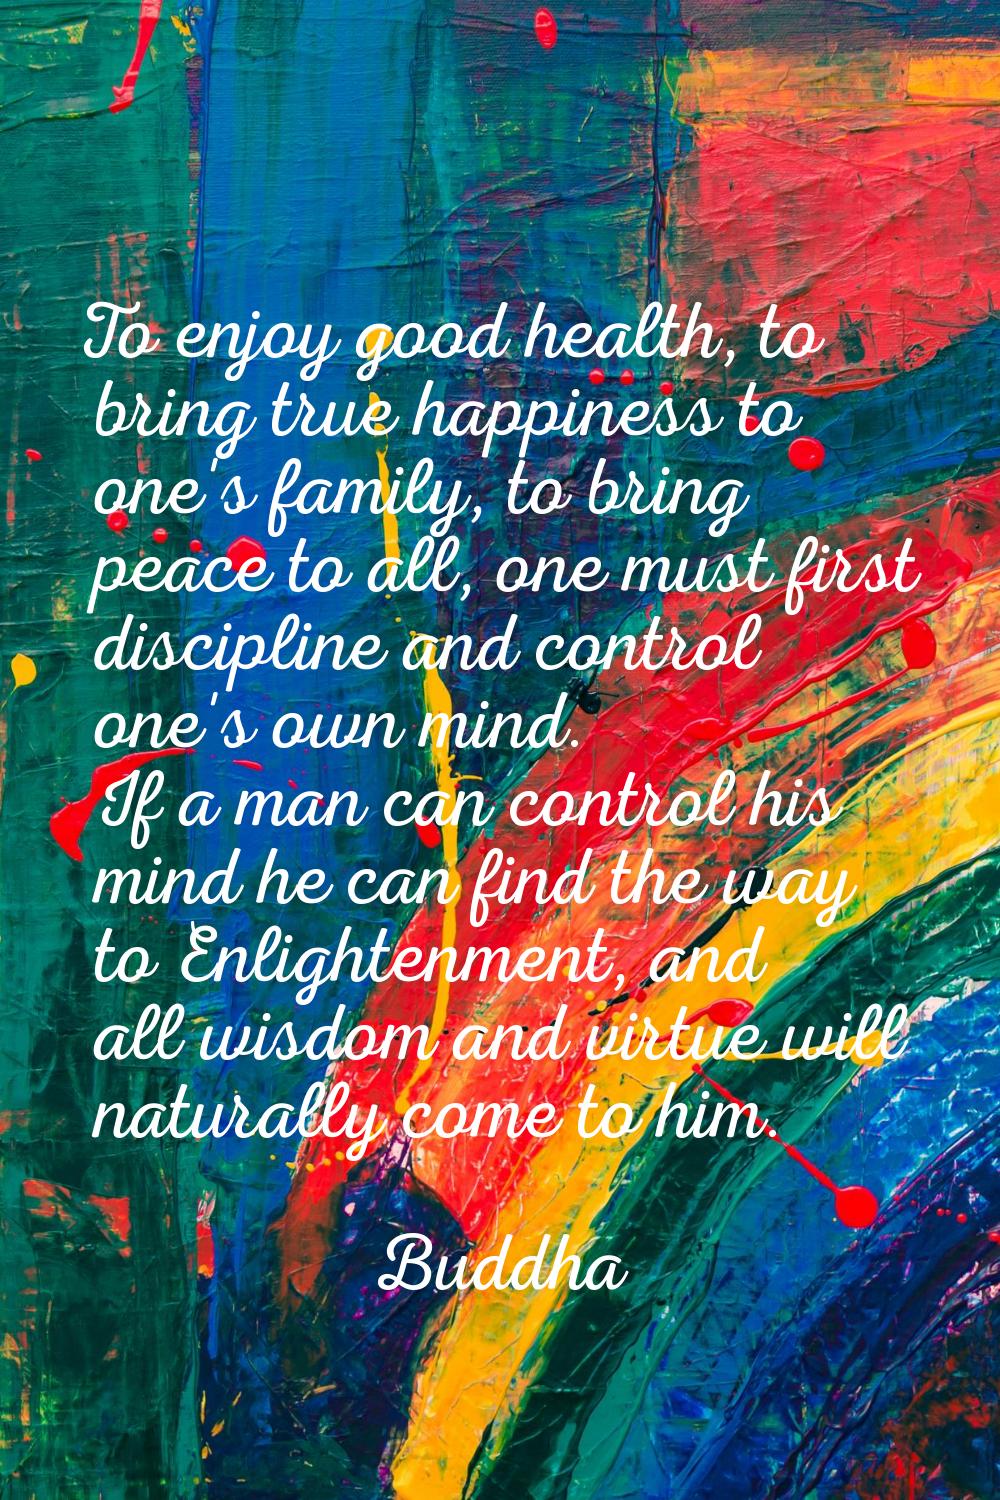 To enjoy good health, to bring true happiness to one's family, to bring peace to all, one must firs